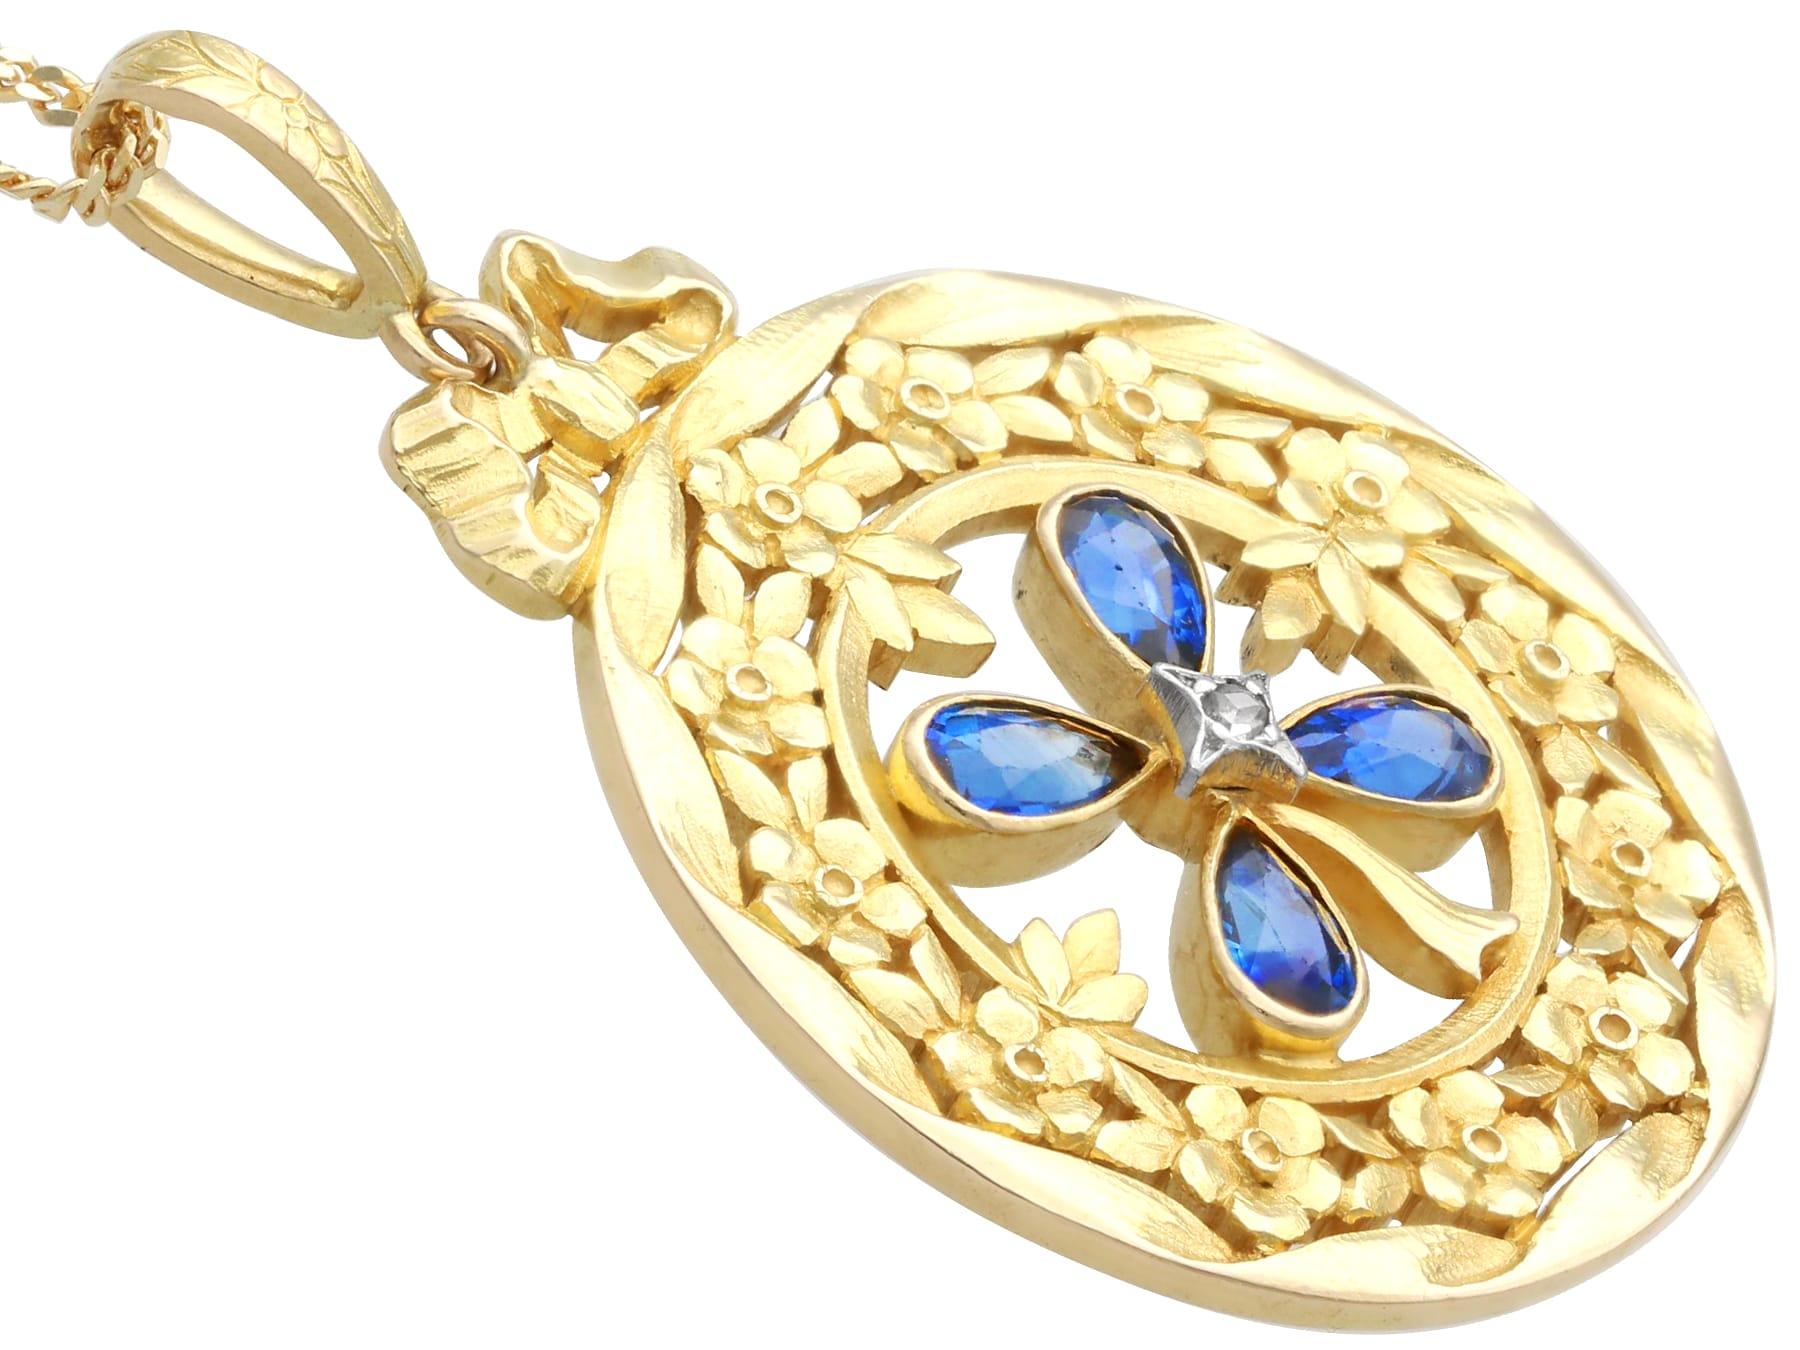 Antique 0.98 Carat Sapphire and Diamond 18K Yellow Gold Pendant In Excellent Condition For Sale In Jesmond, Newcastle Upon Tyne